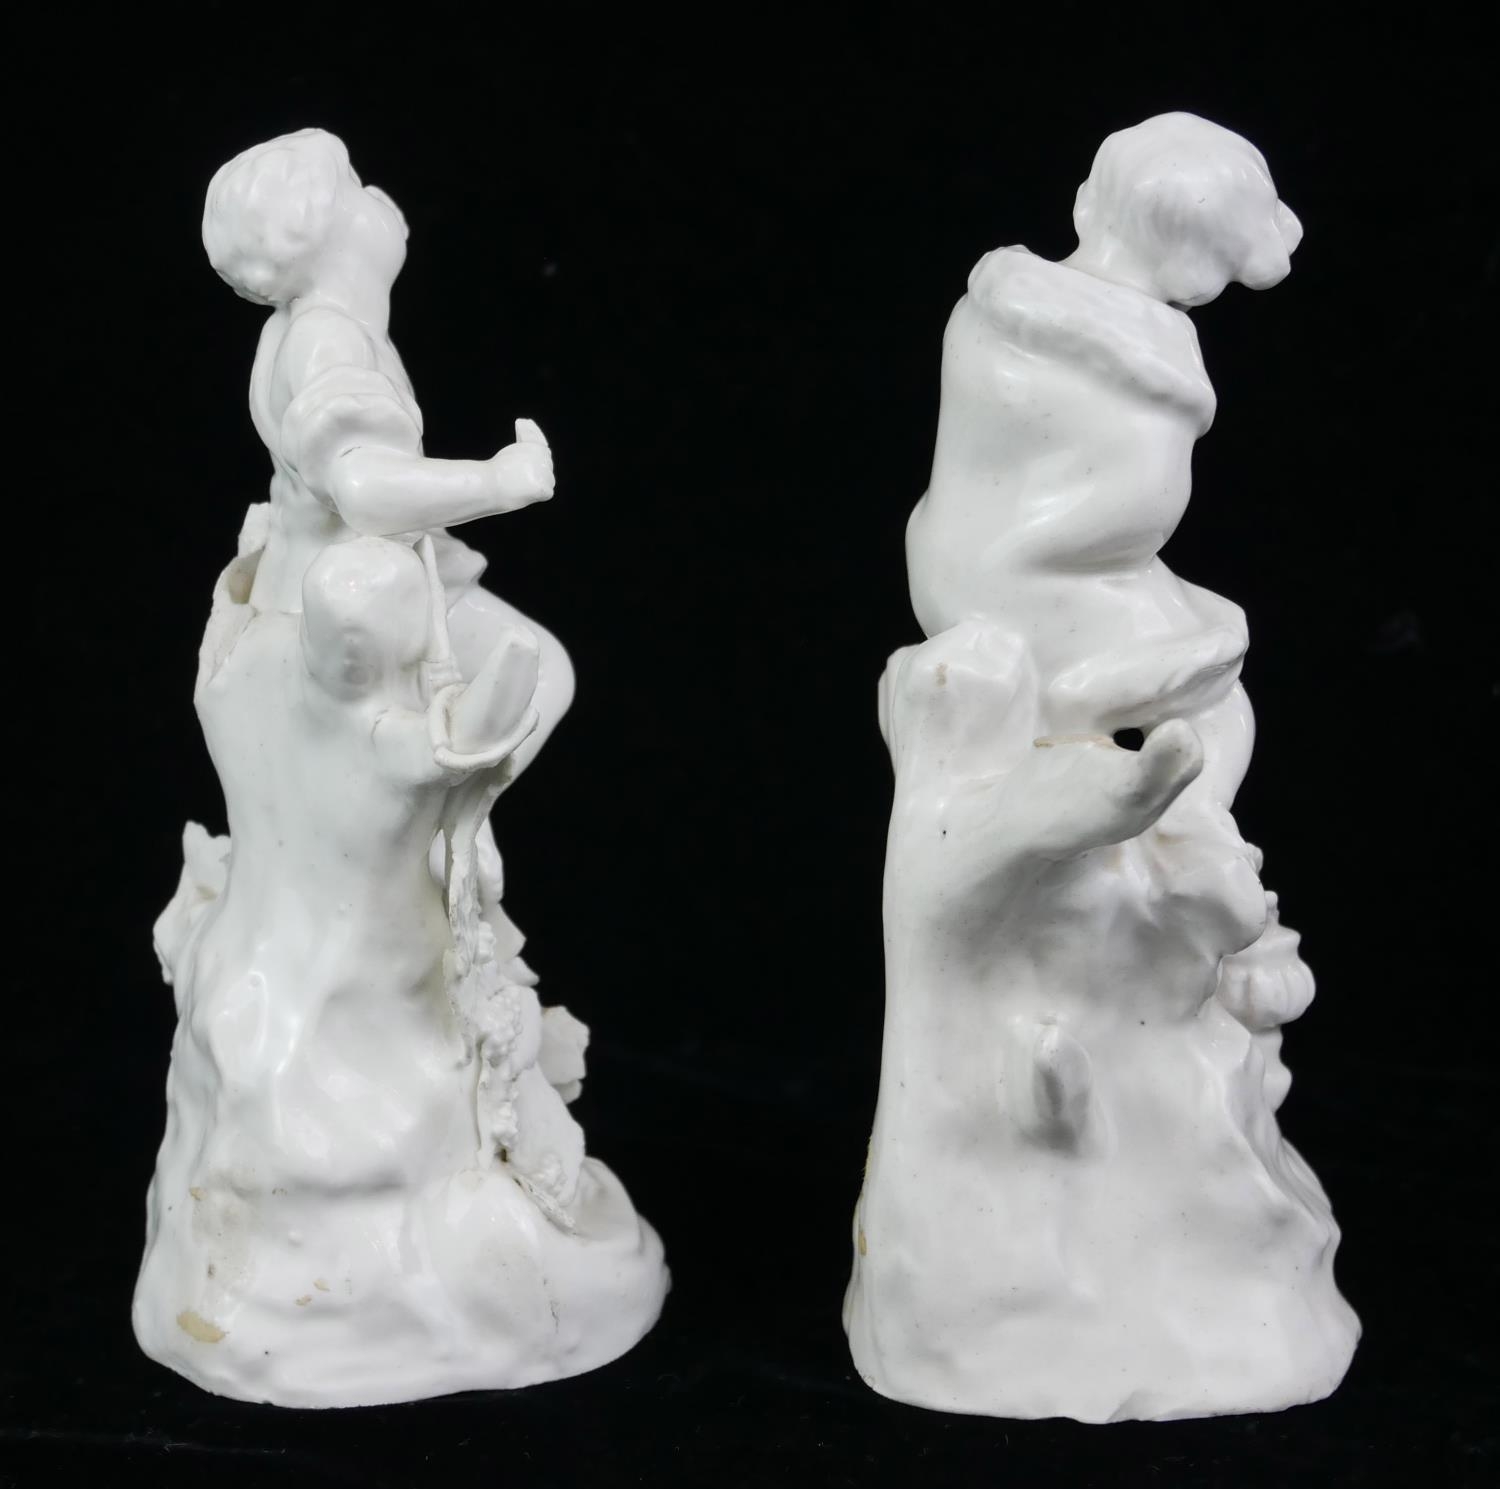 A PAIR OF RARE PLYMOTH 18TH CENTURY HARD PASTE BLANC DE CHINE PORCELAIN MODELS OF ALLEGORICAL - Image 5 of 7